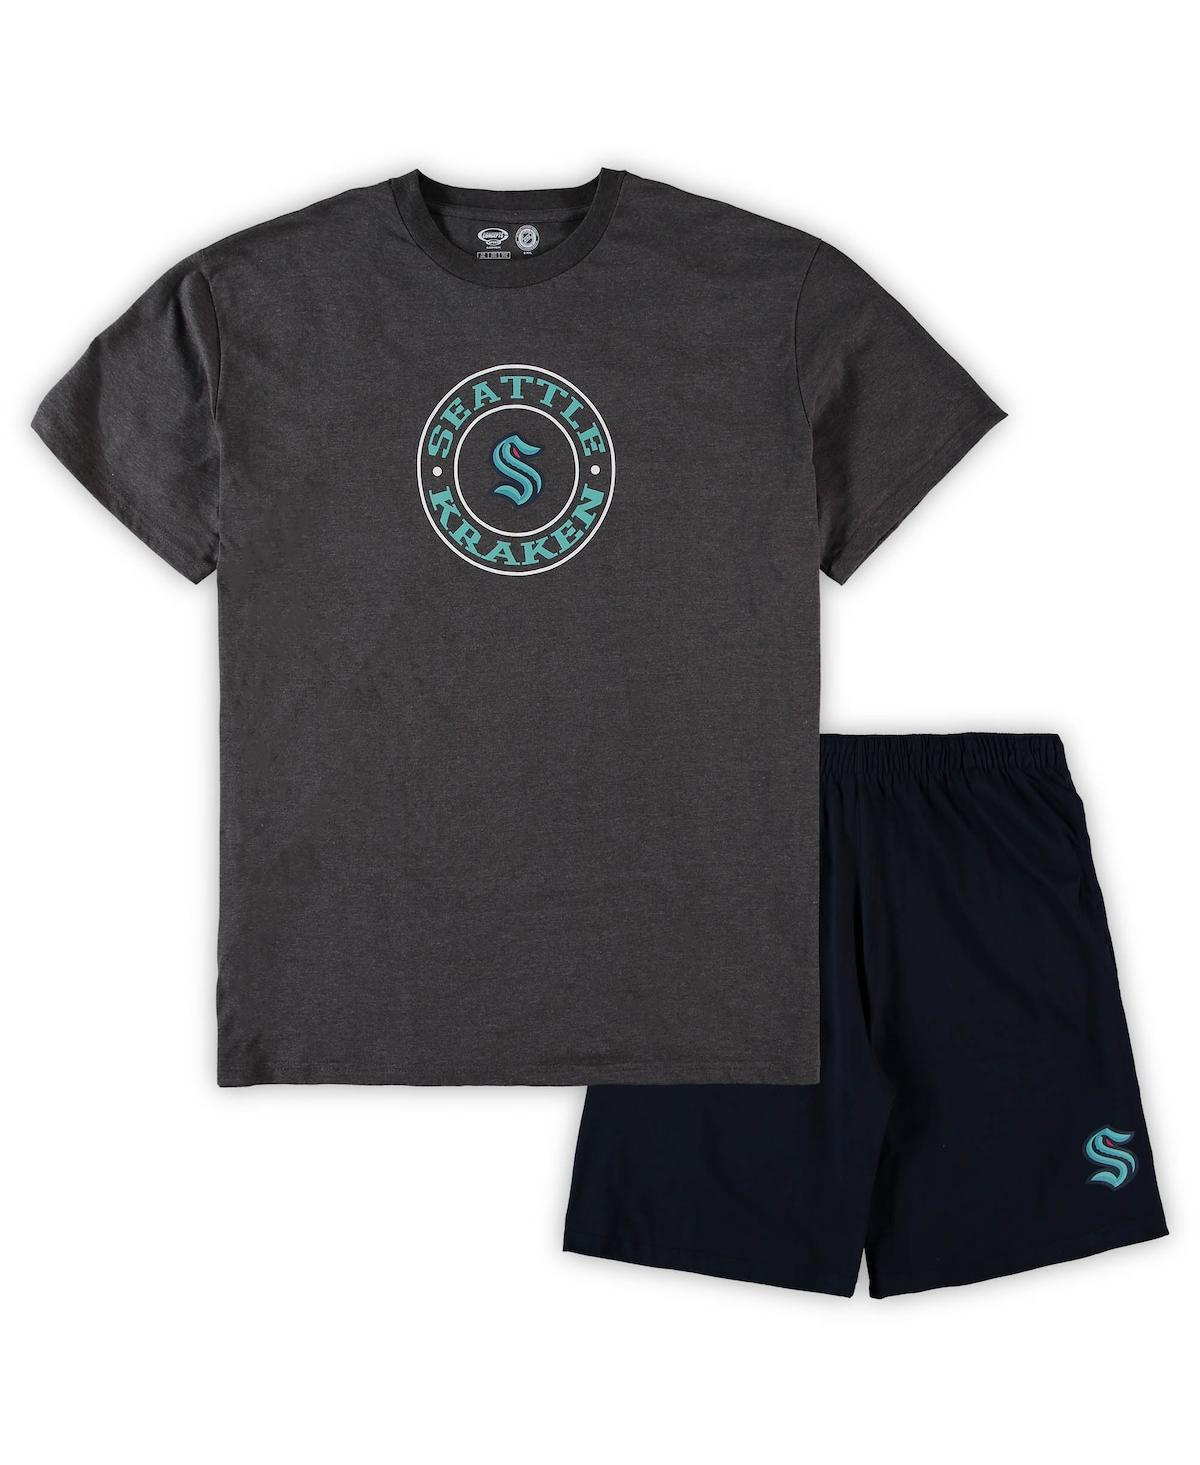 Men's Concepts Sport Deep Sea Blue, Heathered Charcoal Seattle Kraken Big and Tall T-shirt and Shorts Sleep Set - Deep Sea Blue, Heathered Charcoal